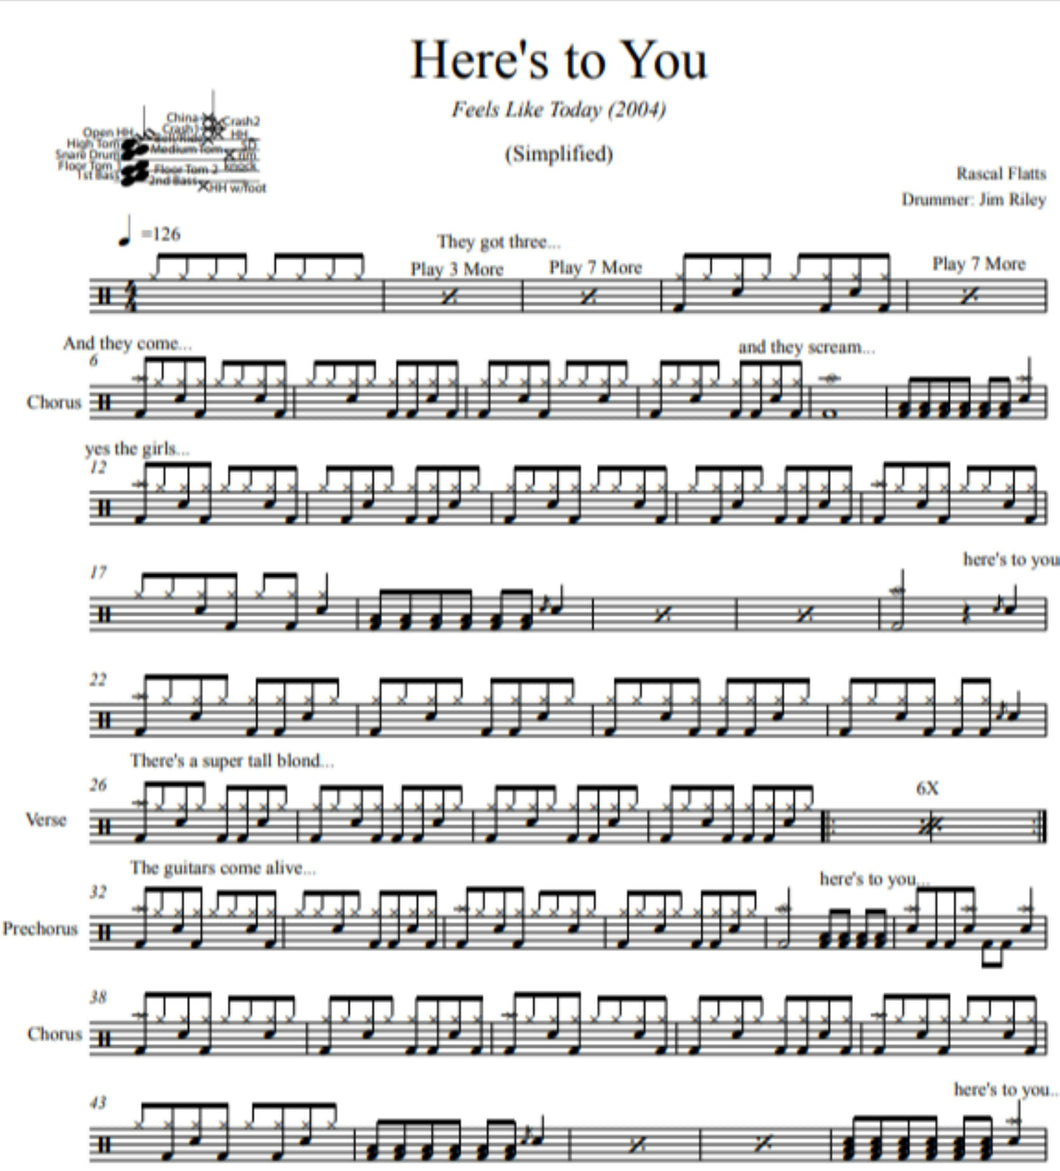 Here's to You - Rascal Flatts - Simplified Drum Transcription / Drum Sheet Music - DrumSetSheetMusic.com